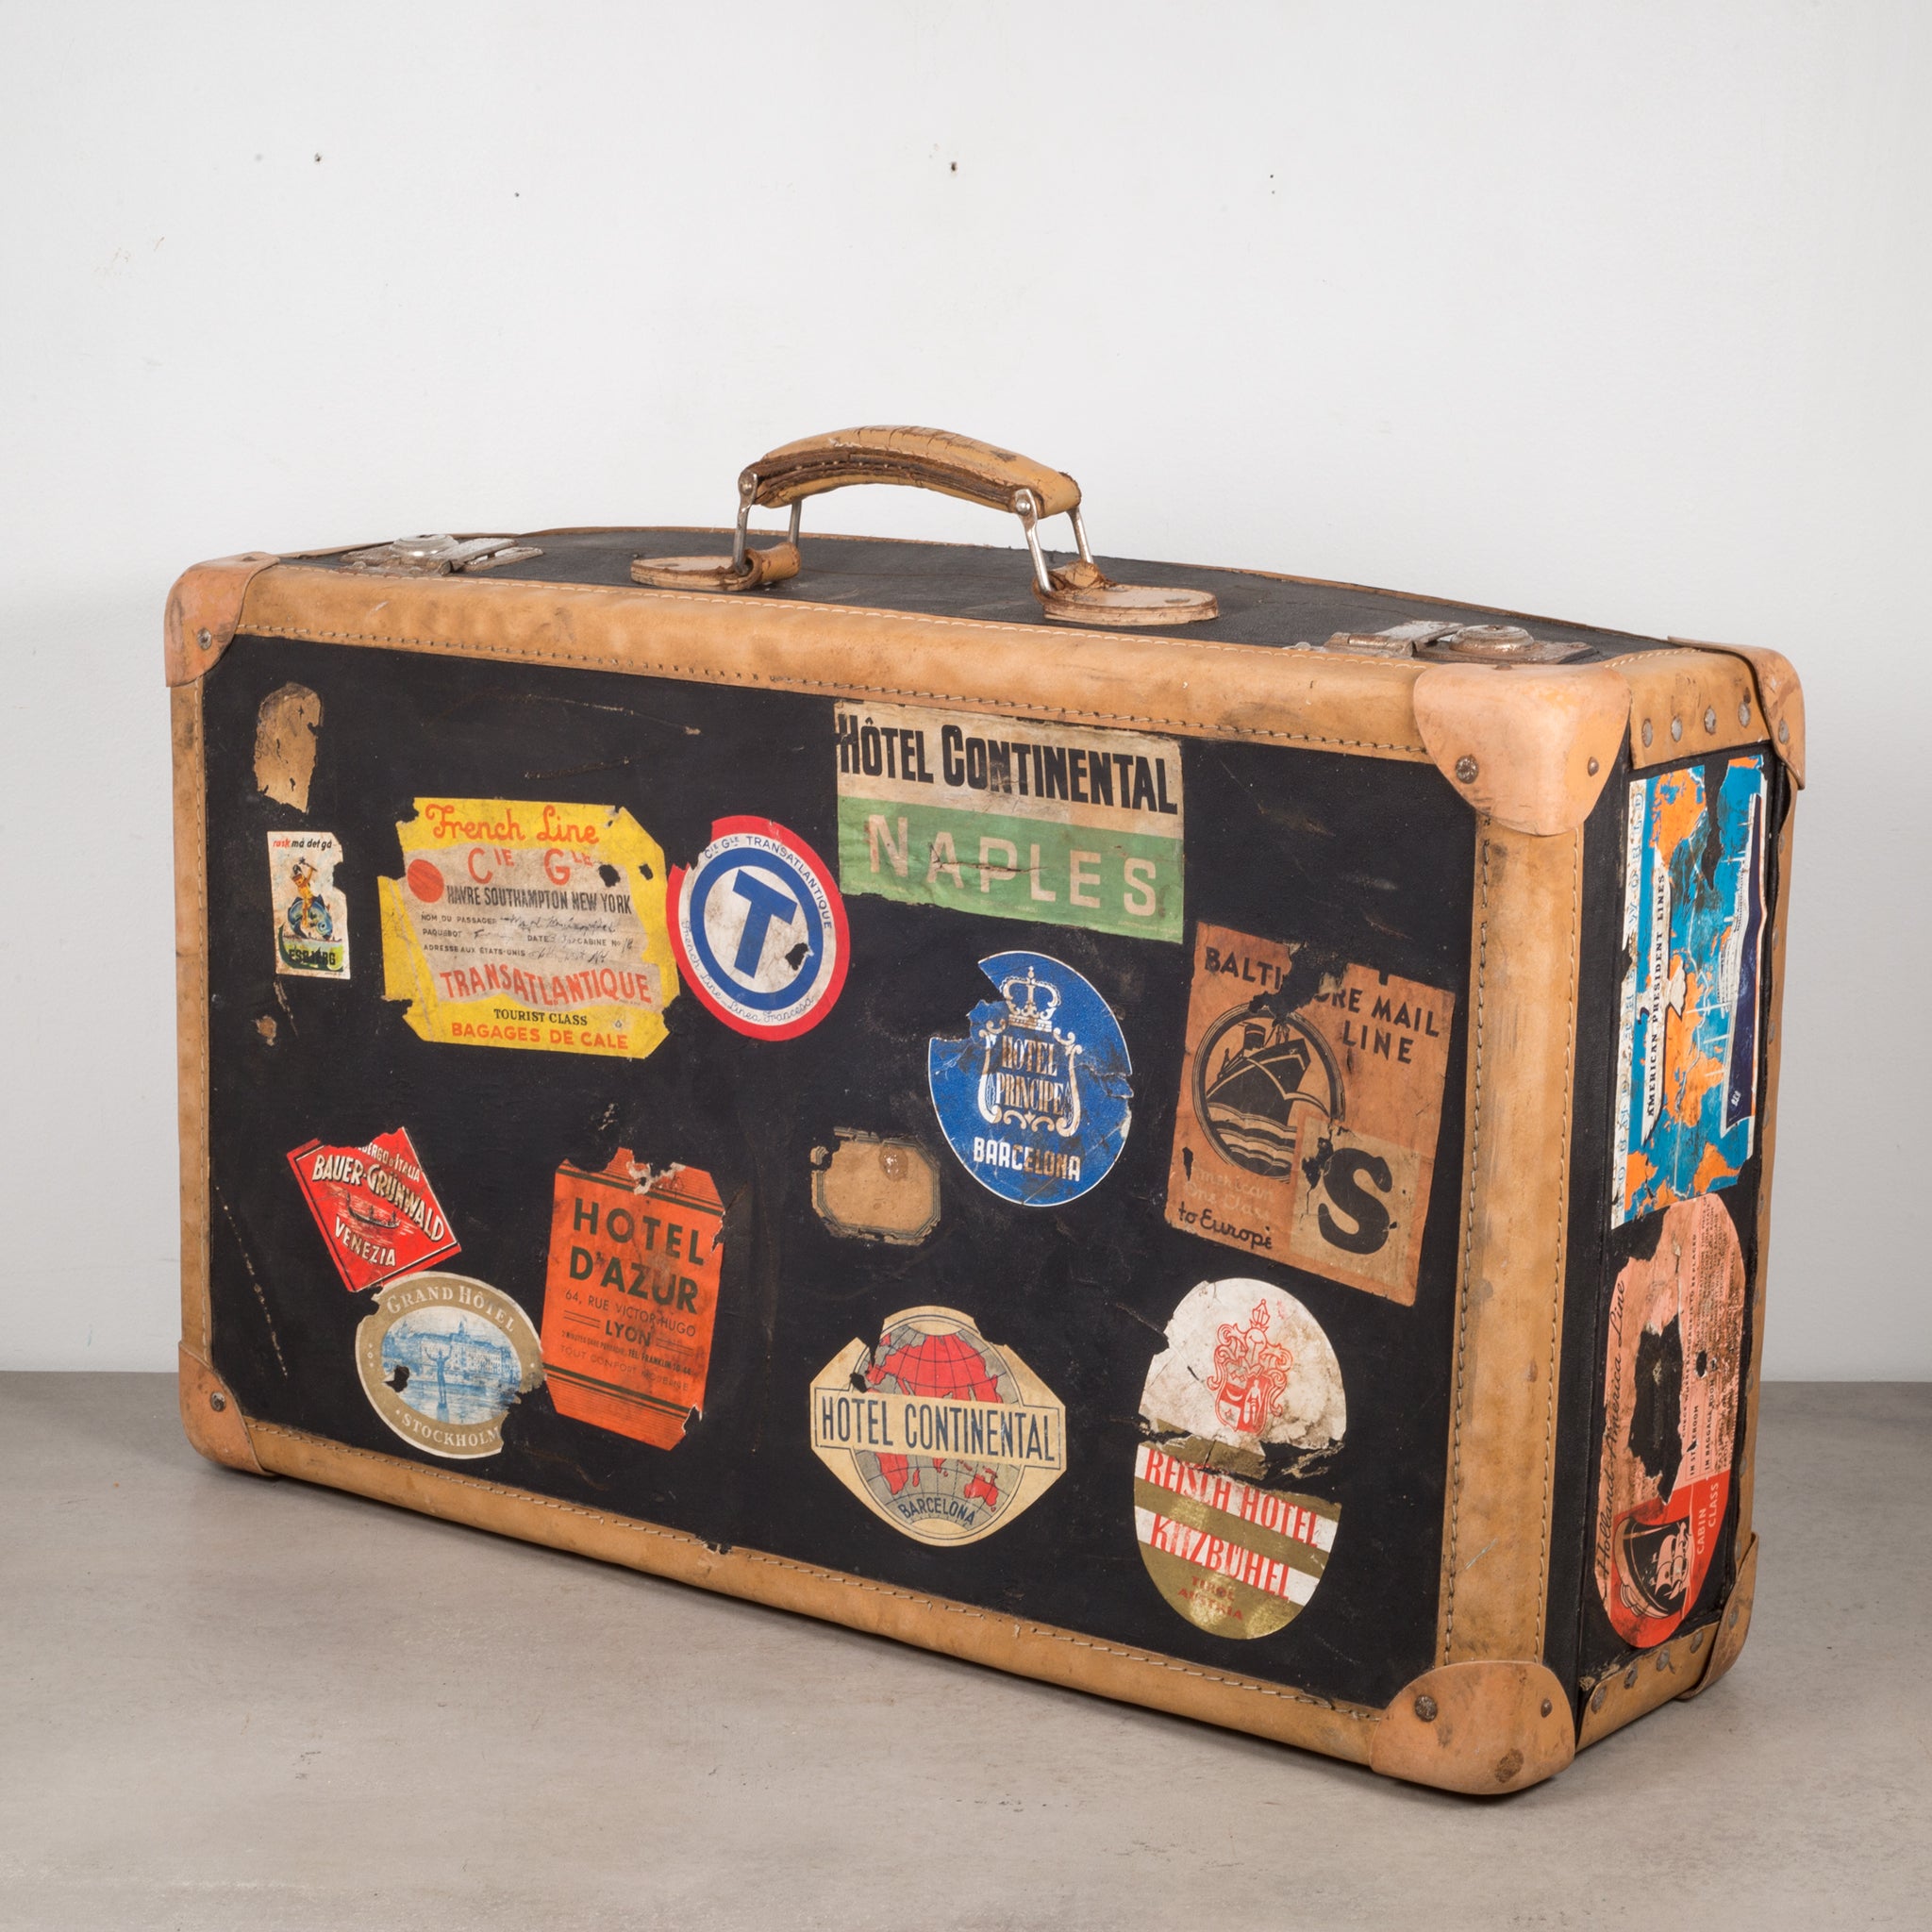 Retro Vintage Travel Suitcase Stickers - Set of 18 Luggage Decal